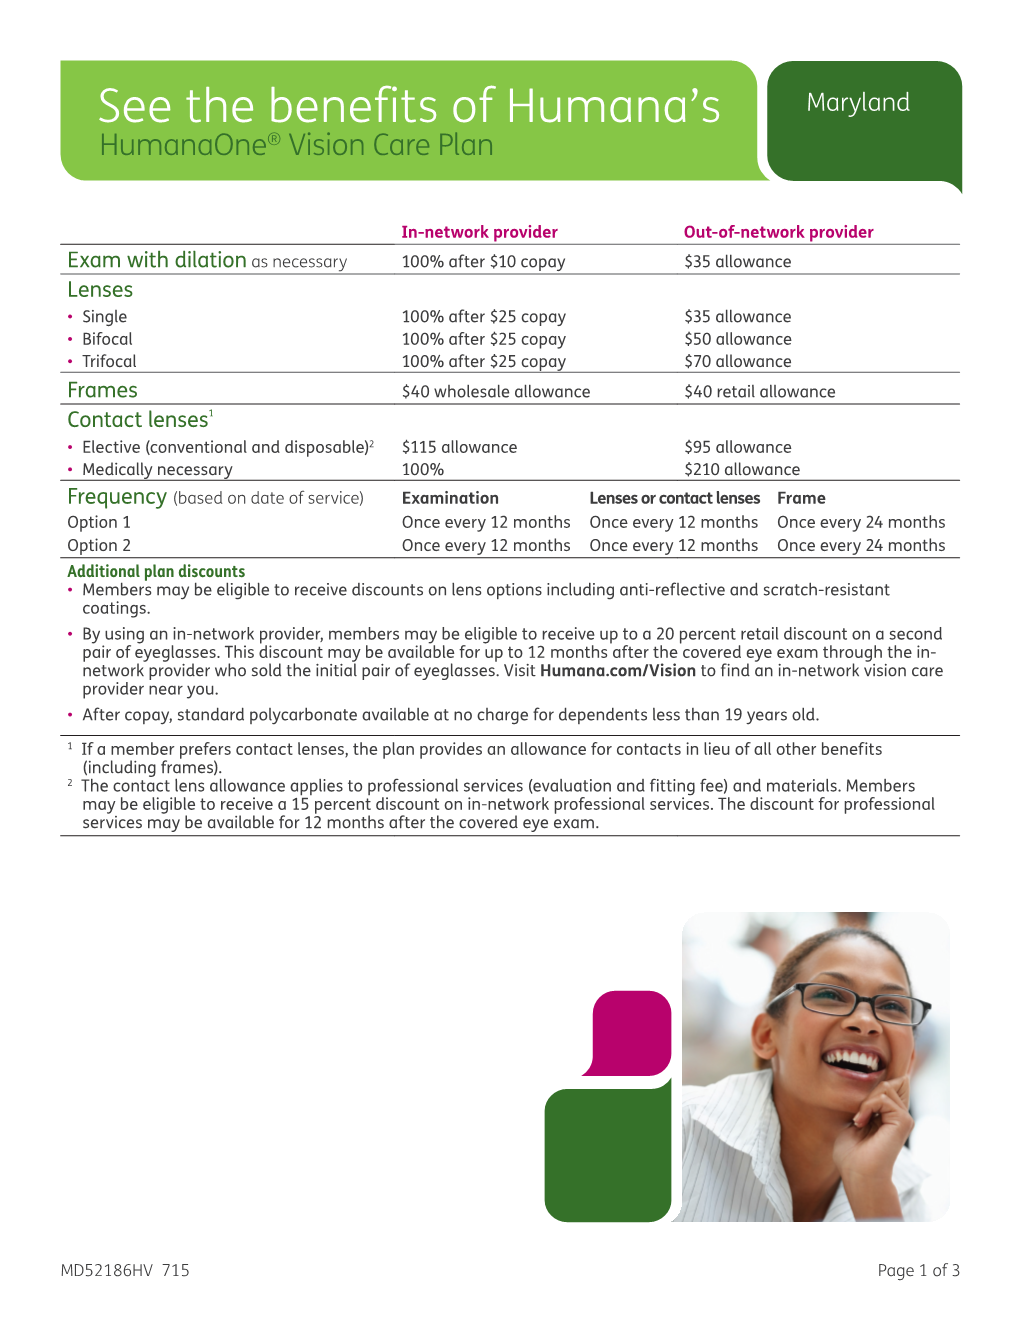 See the Benefits of Humana's